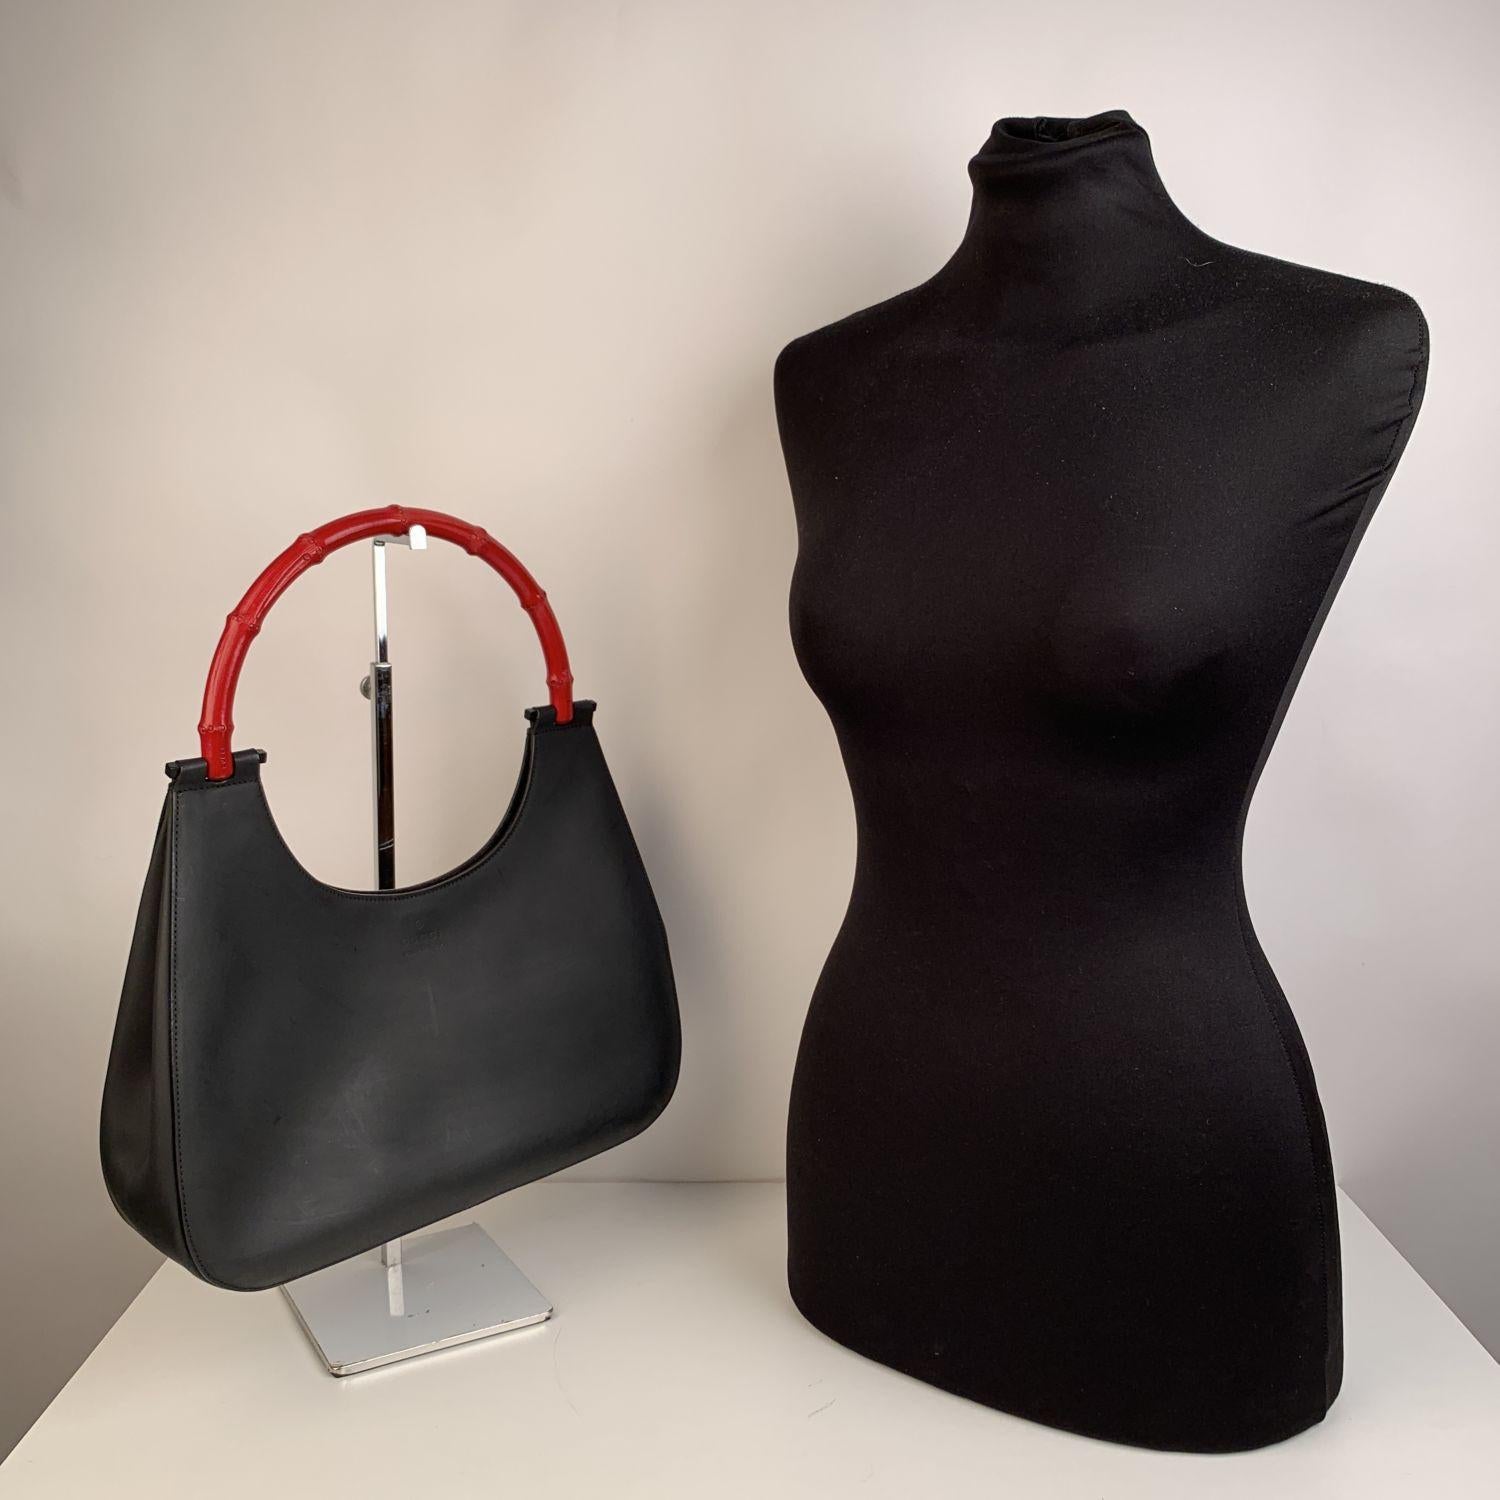 Beautiful Gucci hobo bag, crafted in black leather with bambbo handle, painted in red color. The bag features the 'Gucci - Made in Italy' writing engraved on the front, a magnetic button closure on top, suede lining with and 1 side interior zip